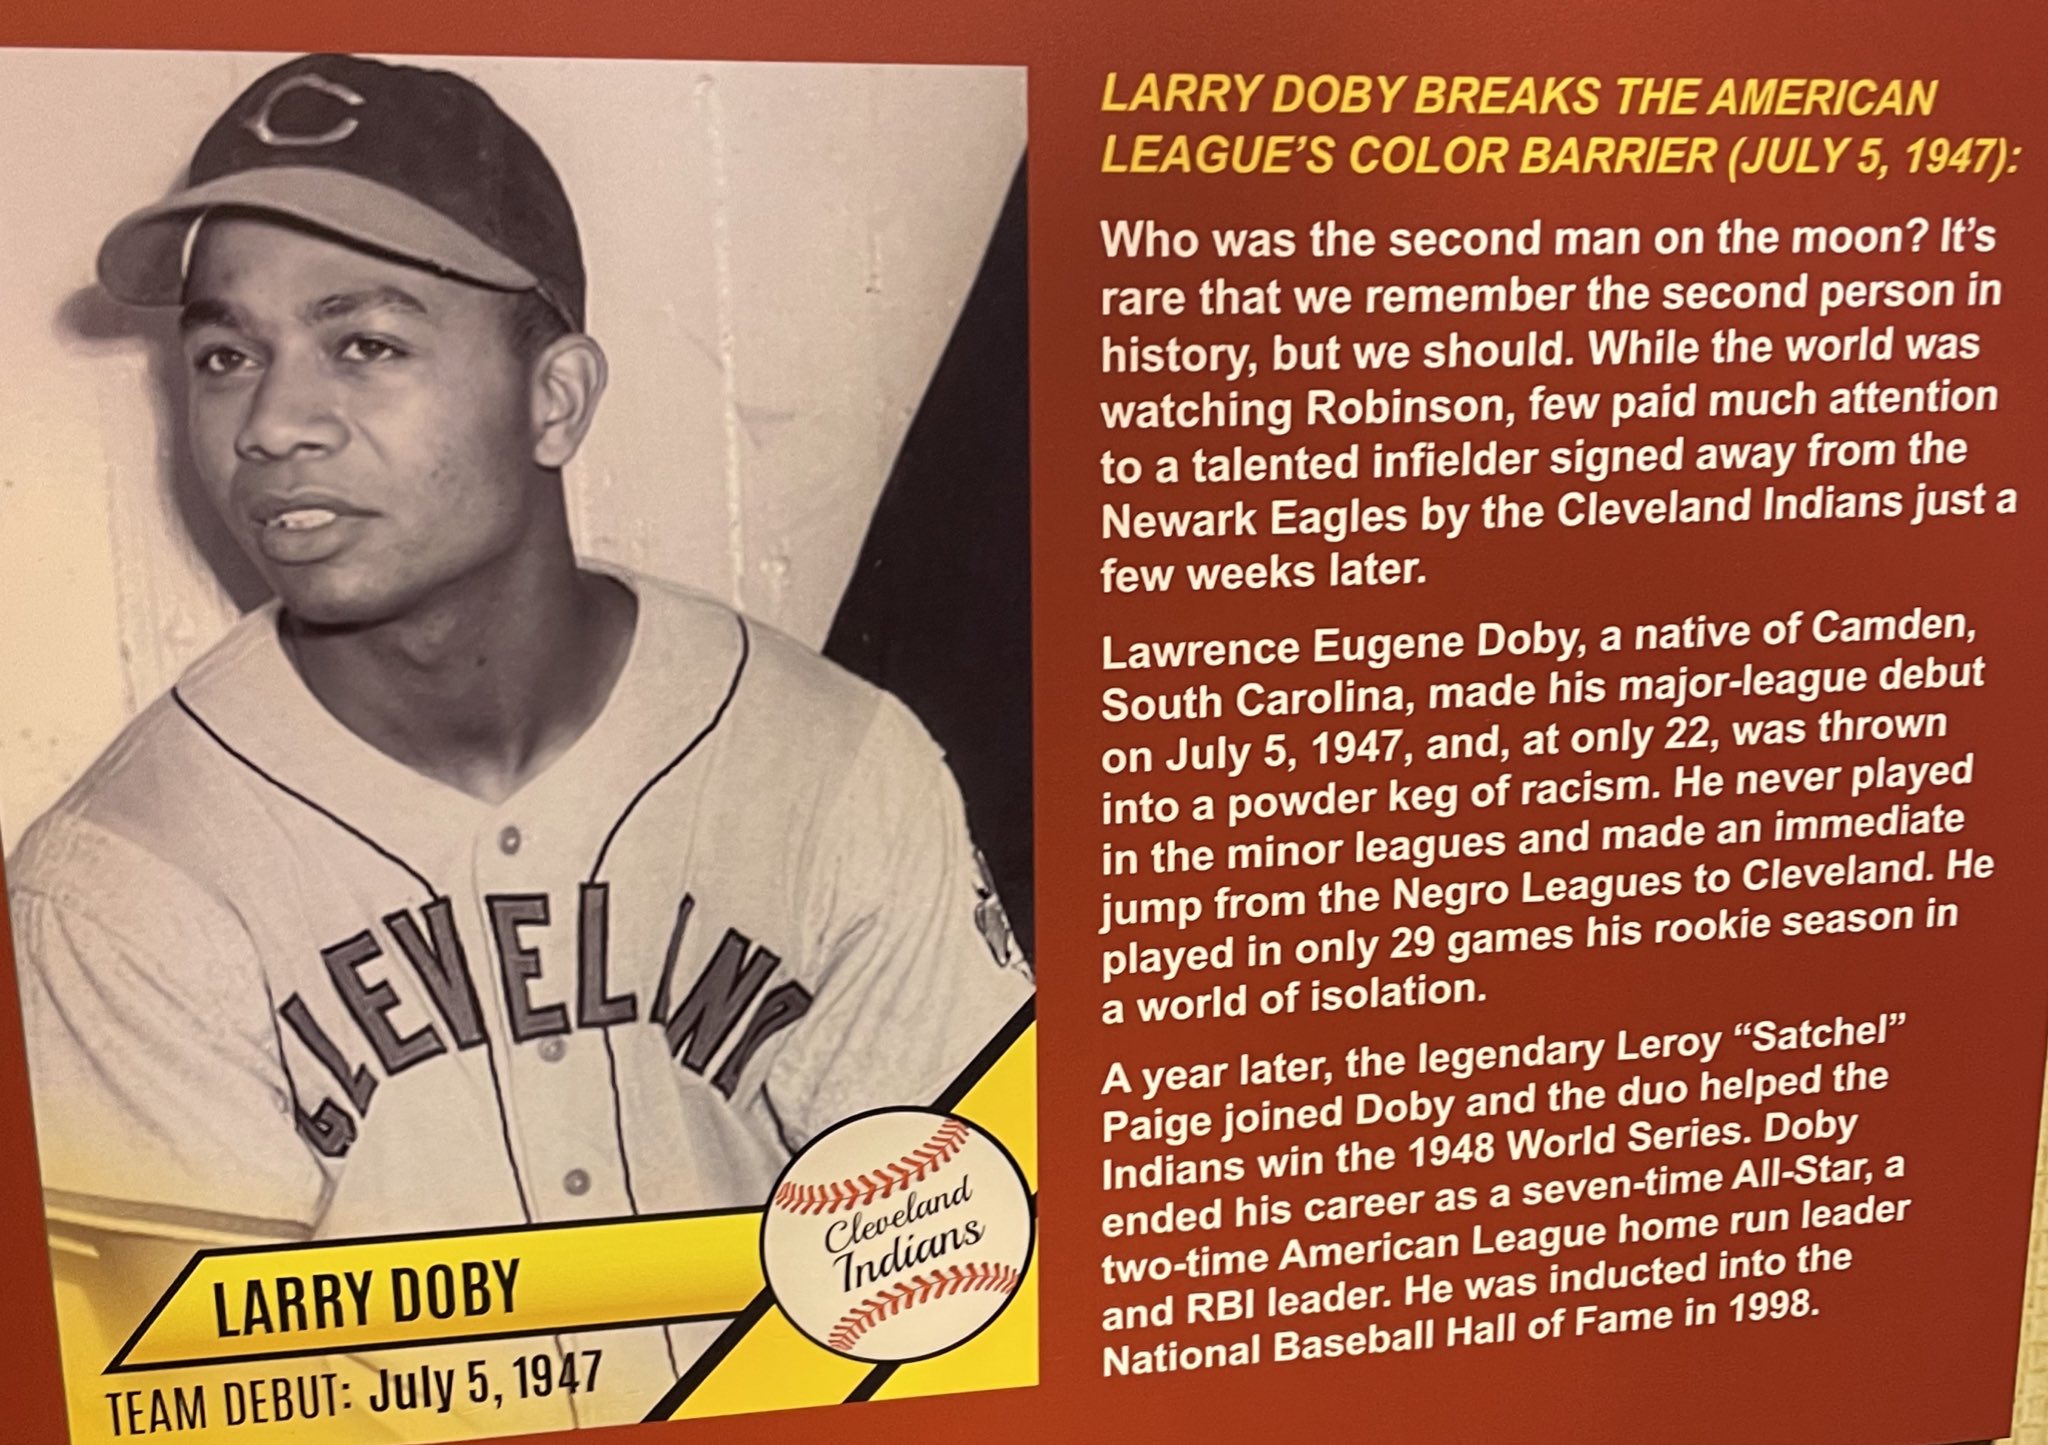 Doby made history with Indians